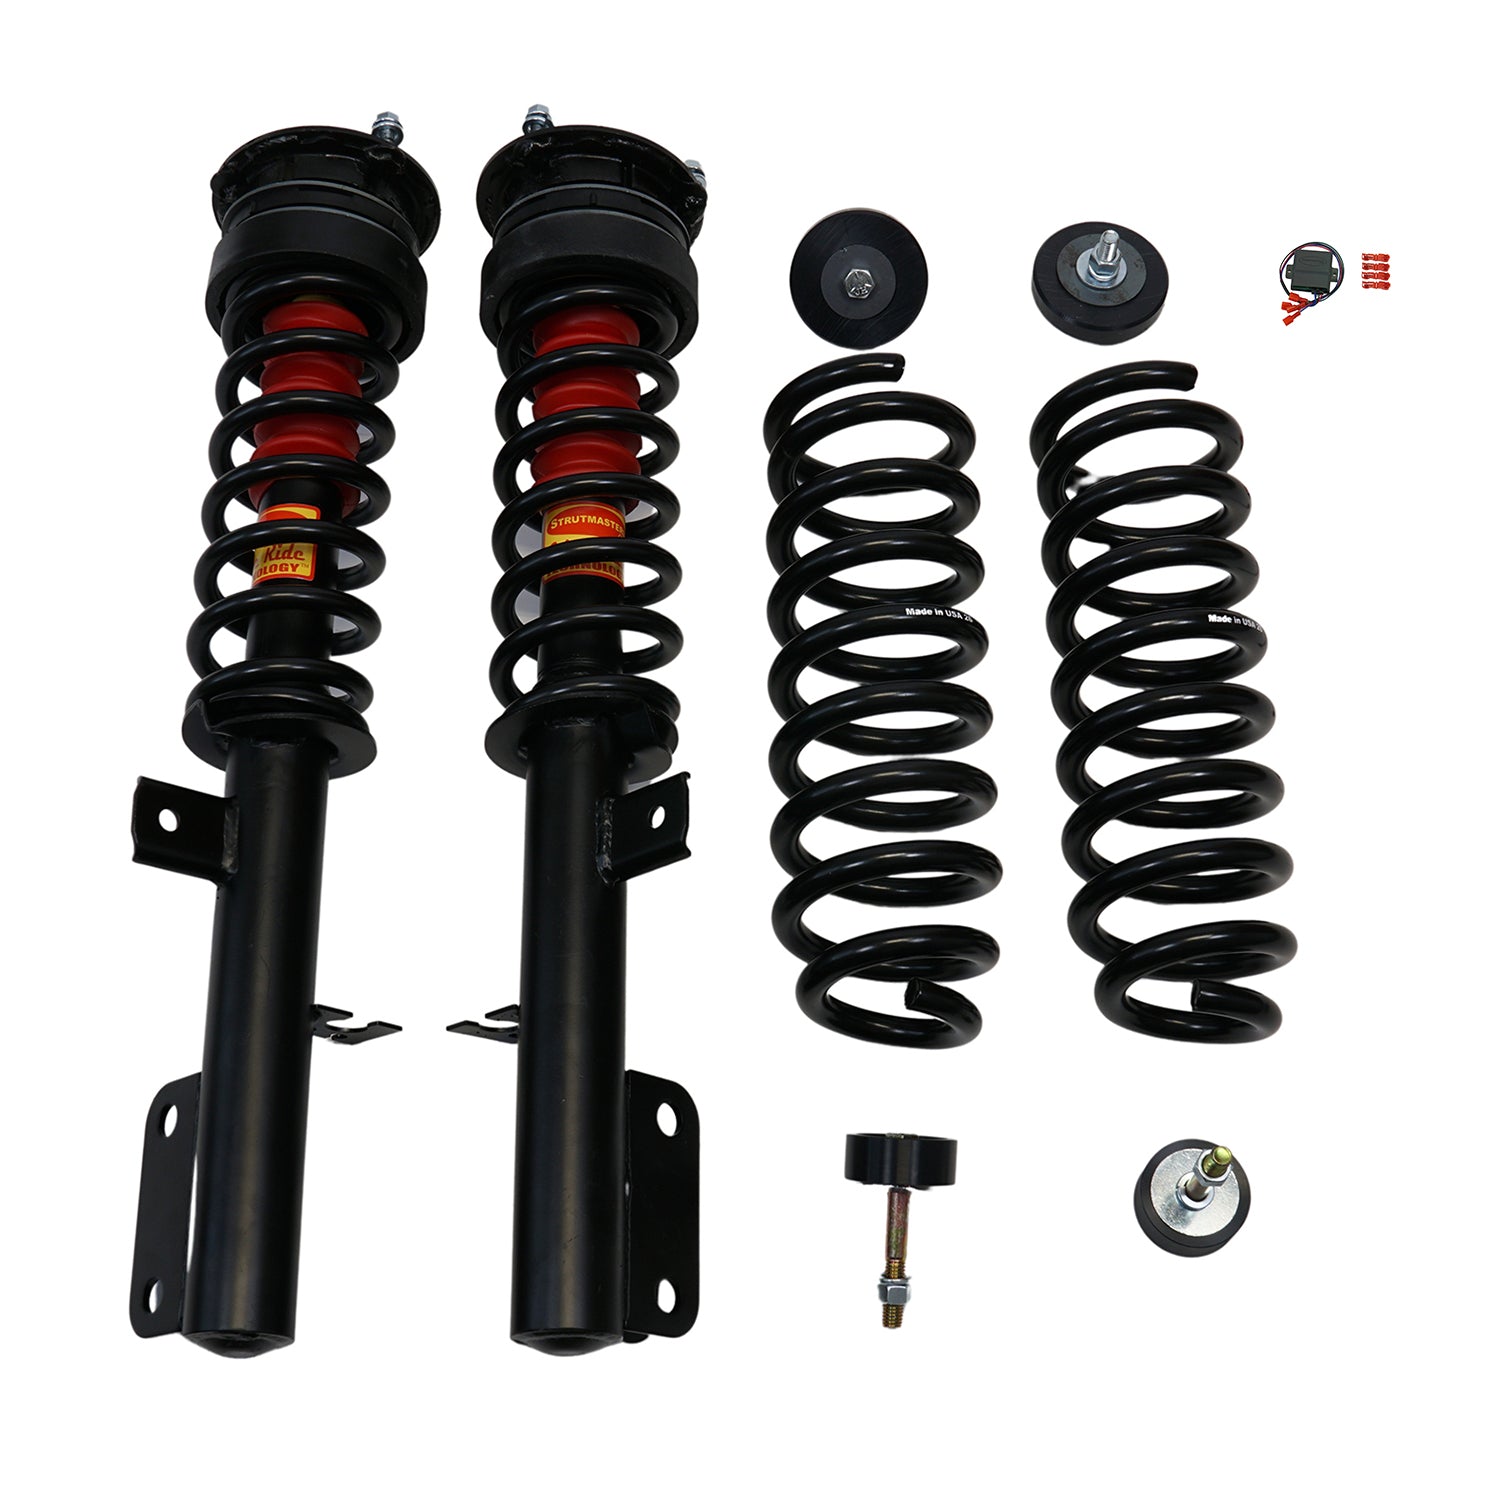 2007-2012 Range Rover L322 Chassis 4-Wheel Air Suspension Conversion Kit  With Warning Light Module (LB54BM)